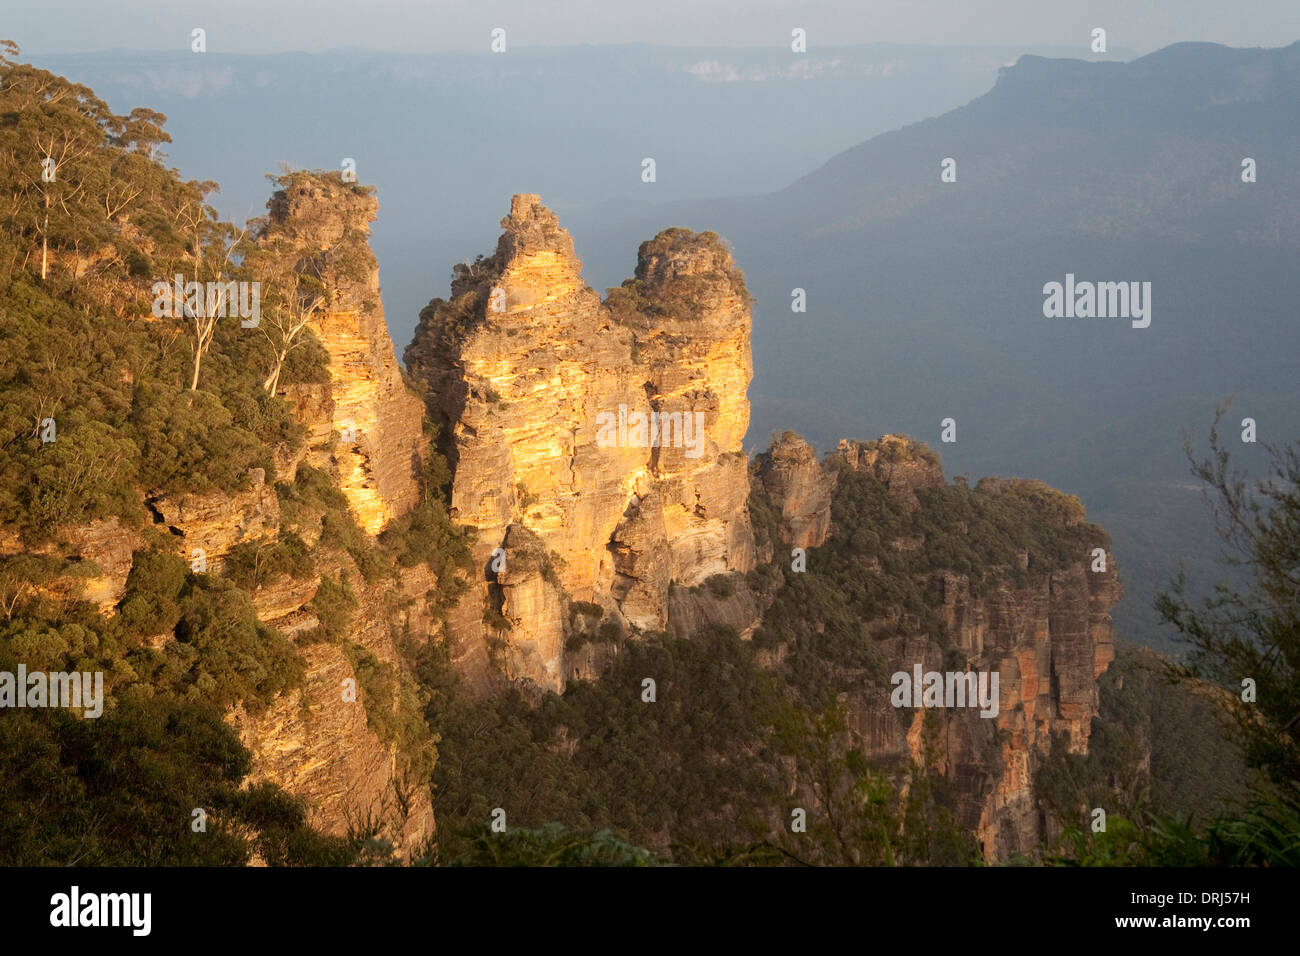 A view of The Three Sisters, near Katoomba in the Blue Mountains, New South Wales, Australia Stock Photo